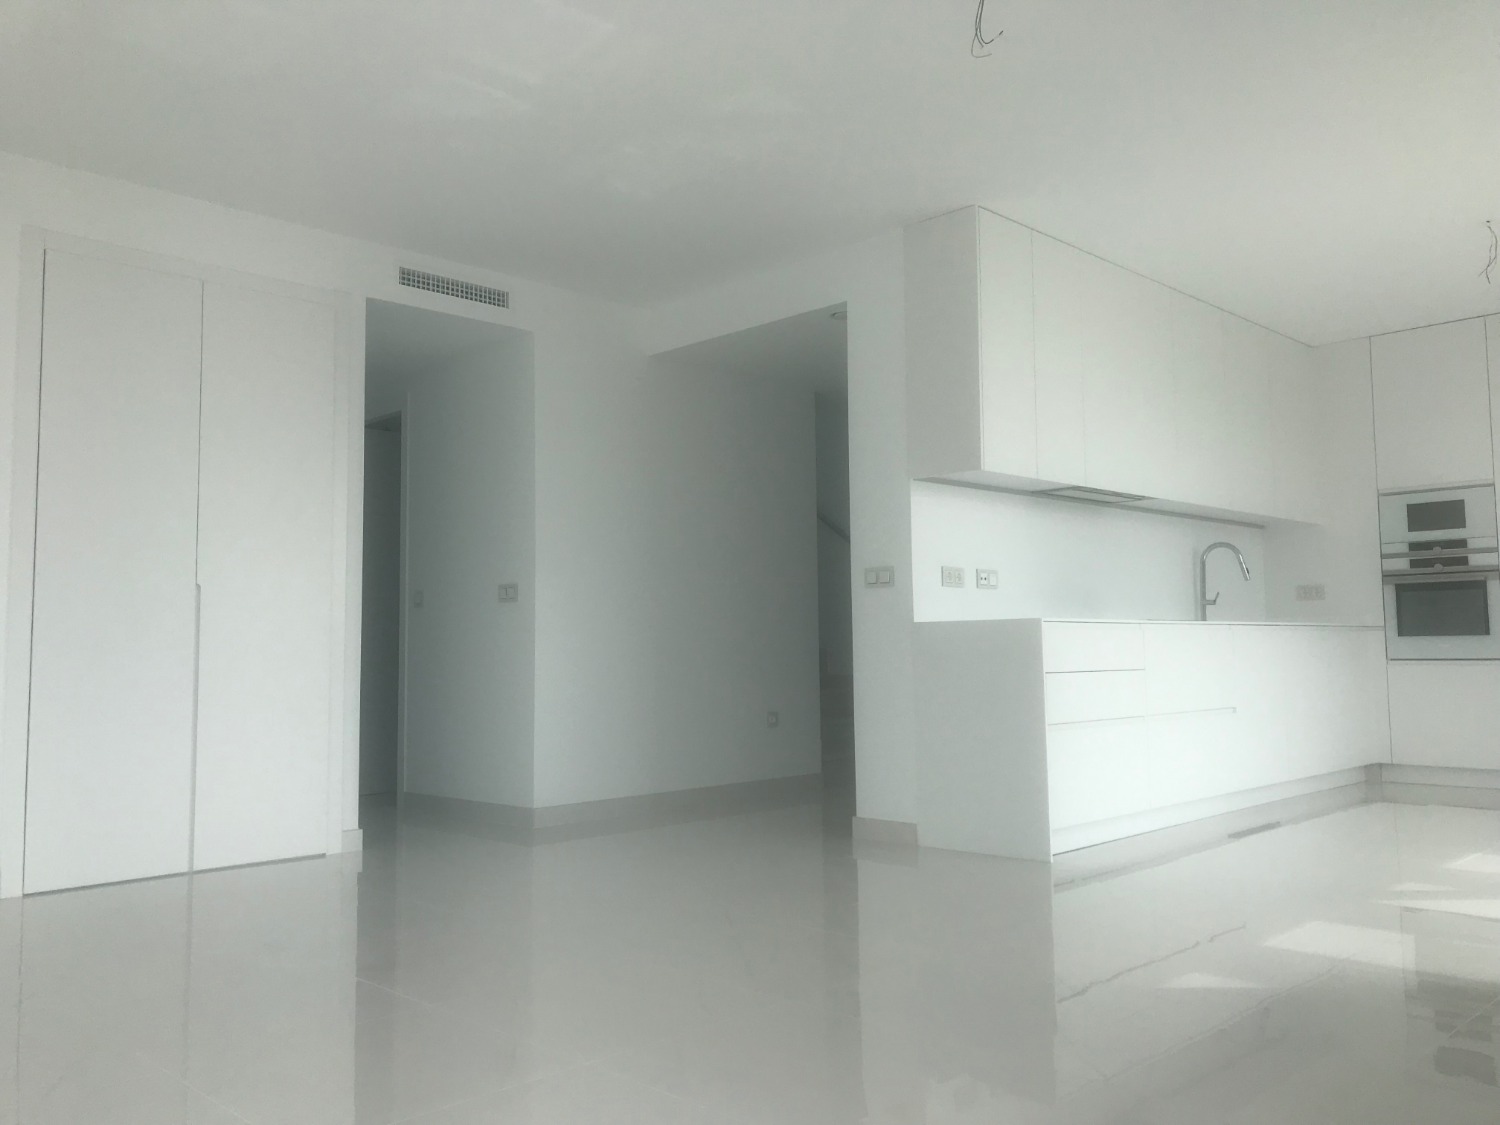 Penthouse with 3 bedrooms, 2 garages and storage 1